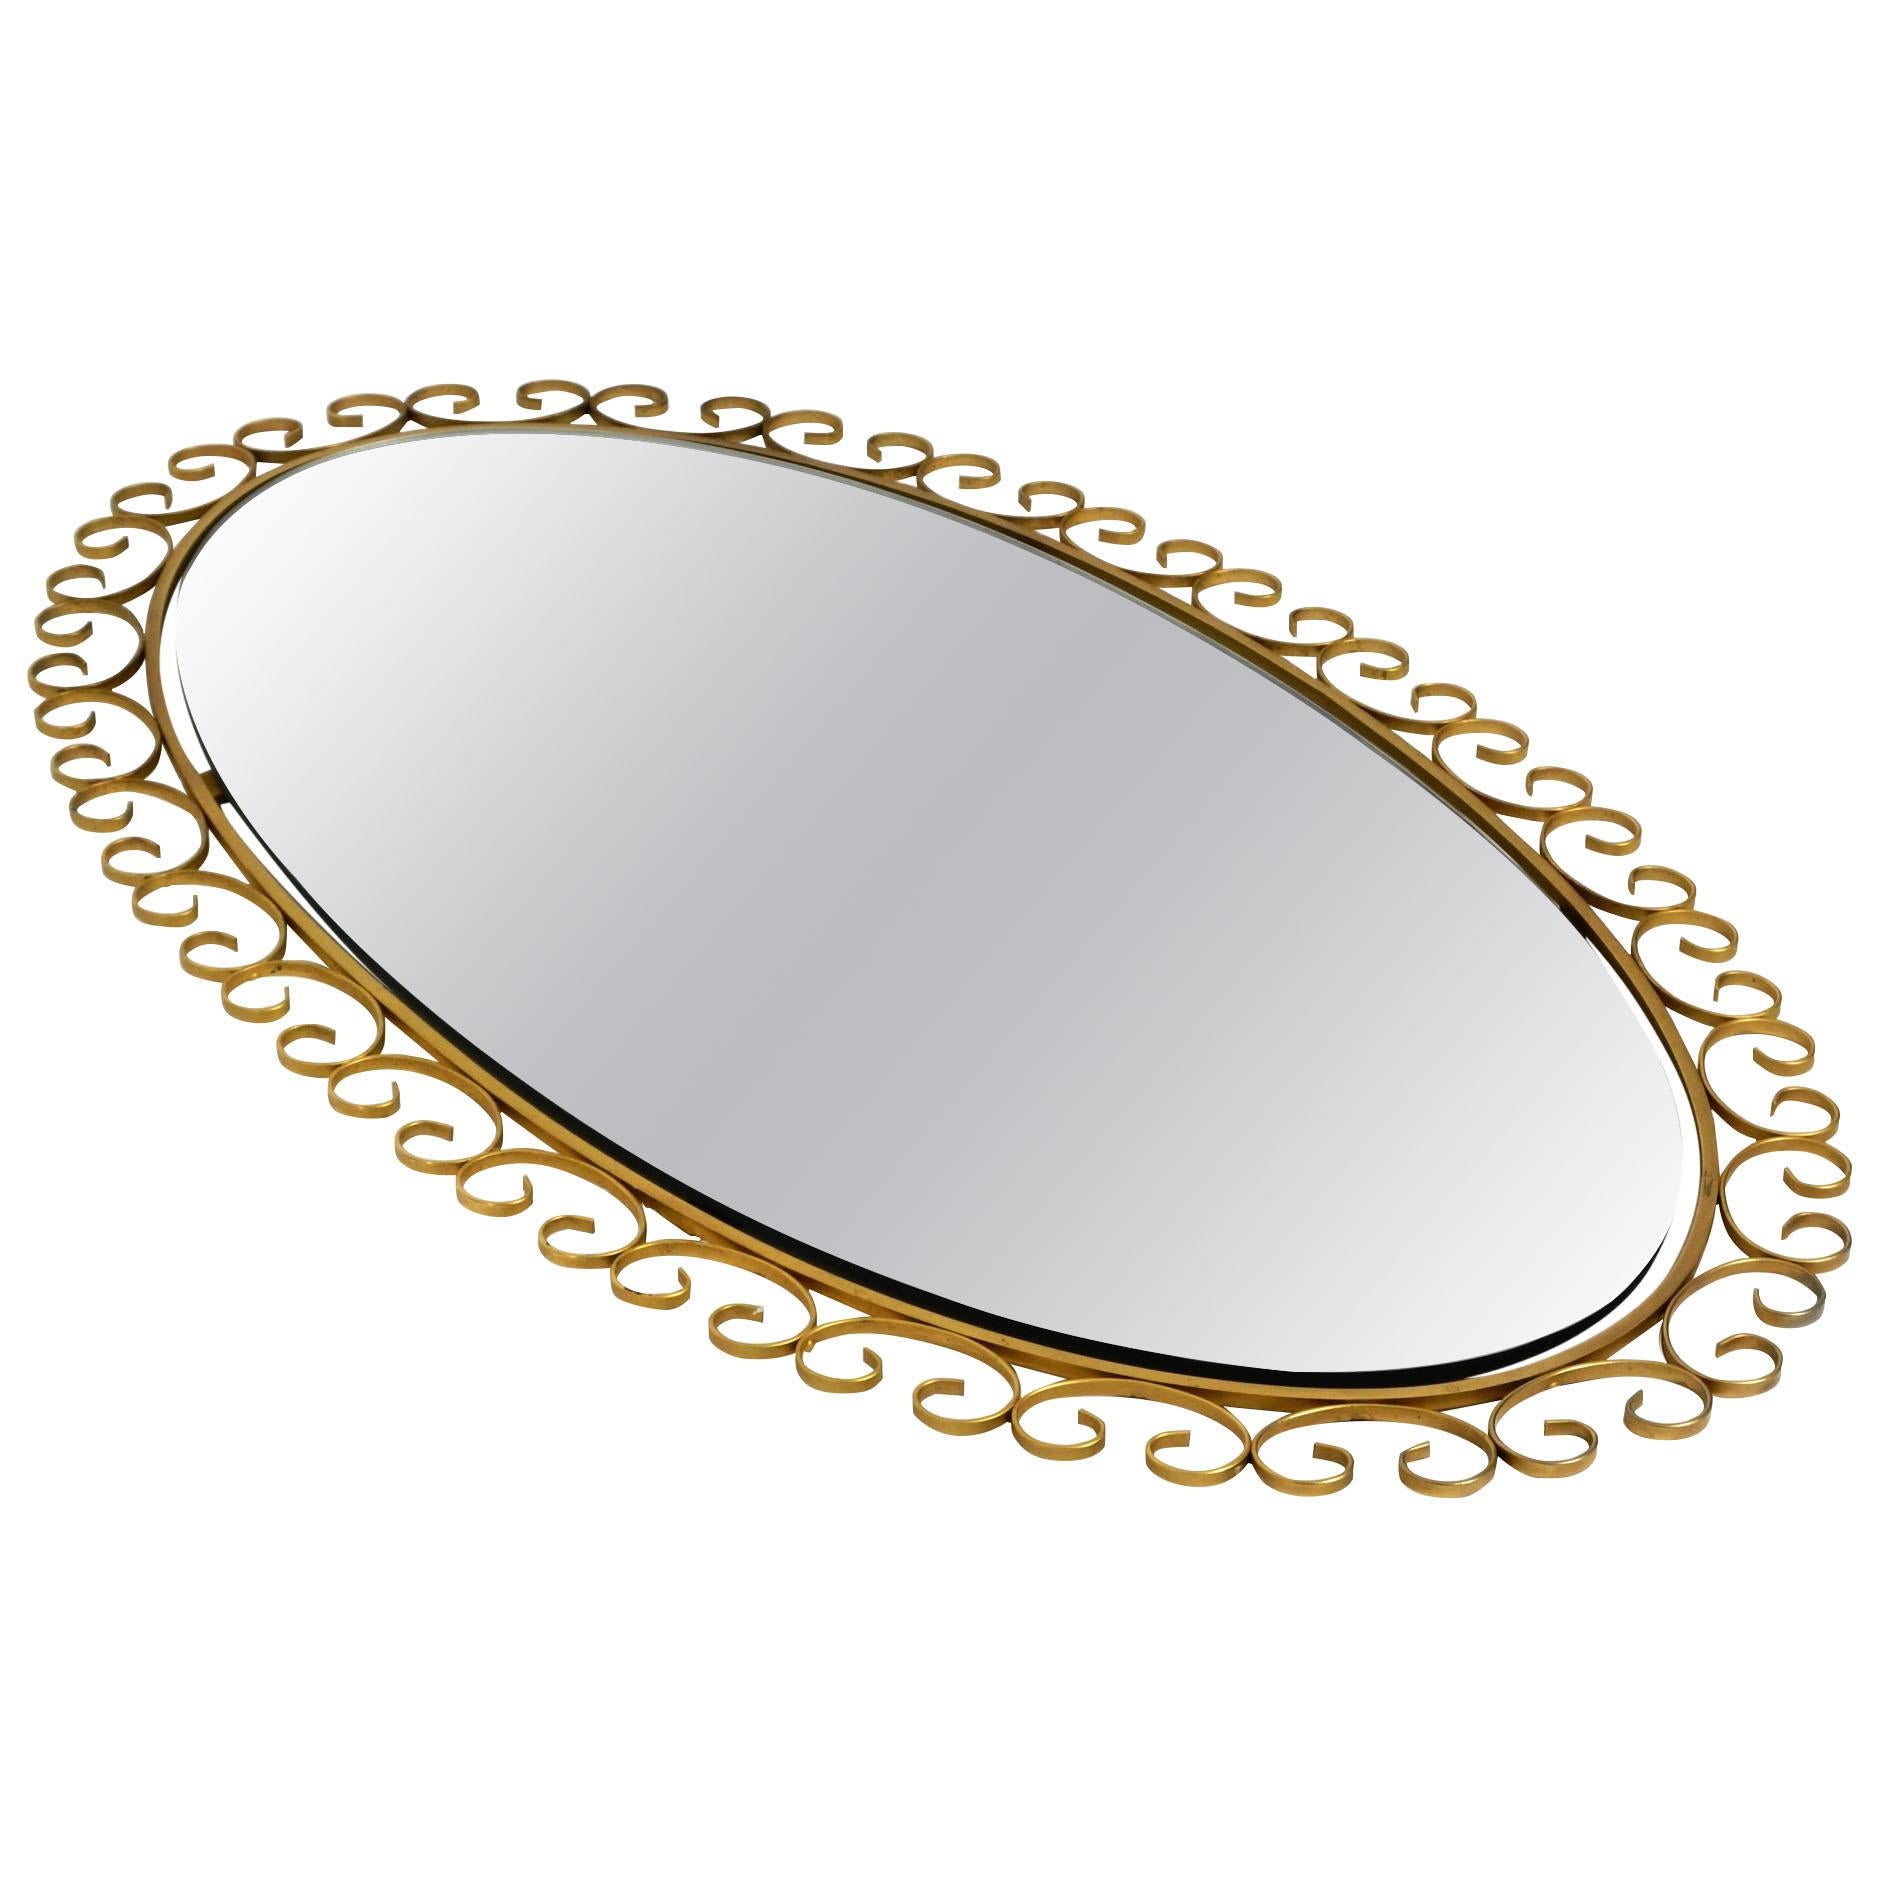 Rare 1960s Large Oval Sunburst Wall Mirror Made of Metal in Brass Anodized